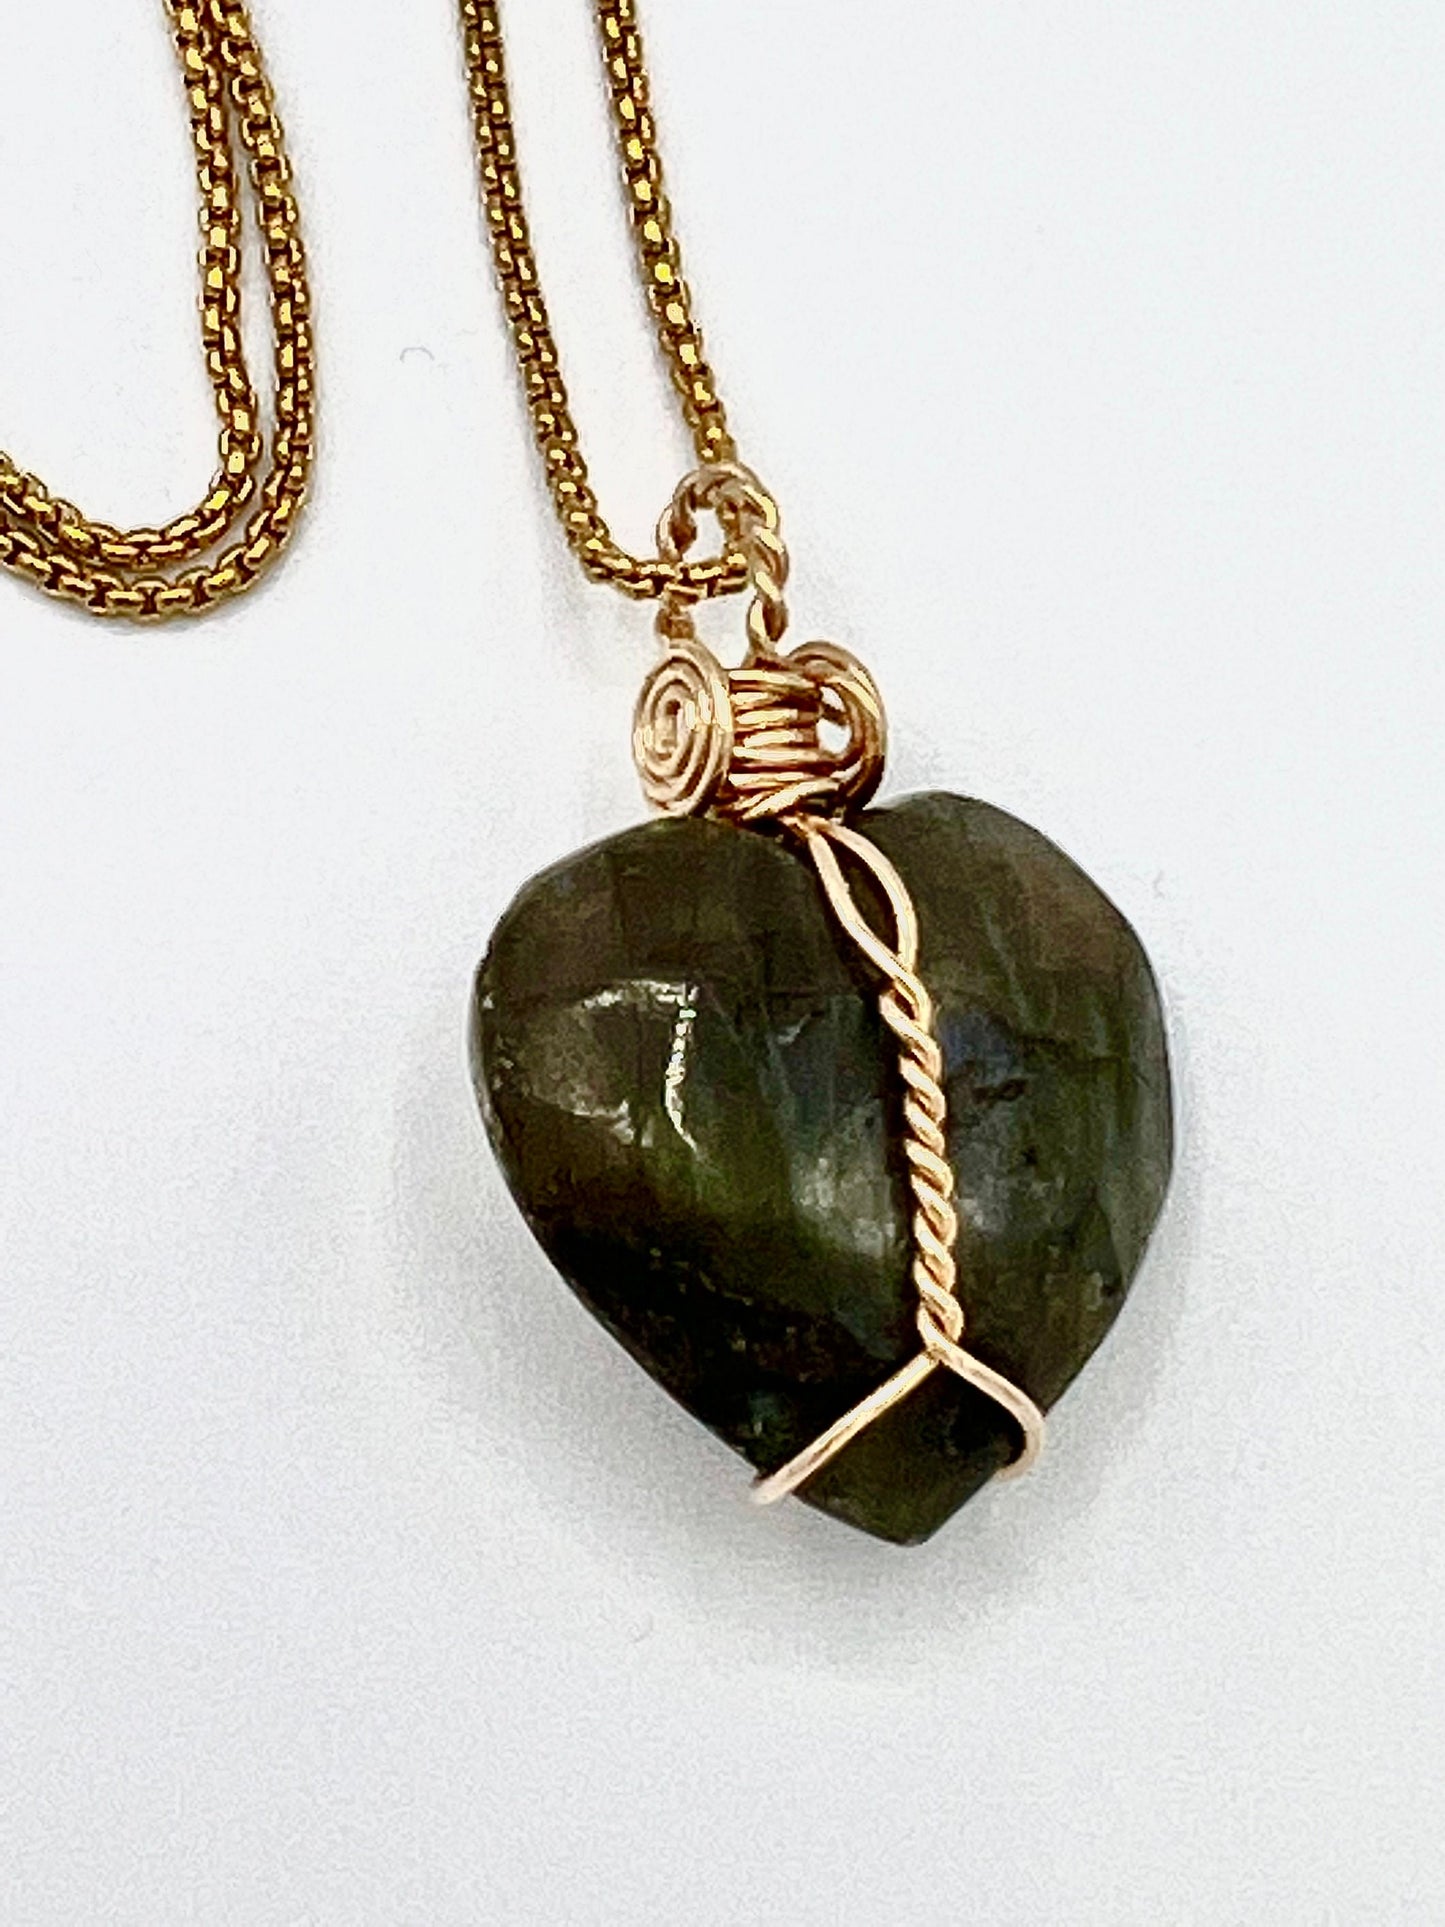 Gold Wire Wrapped, Necklace, Heart Labradorite Pendant, Labradorite Jewelry, Gold Wire Wrapped Labradorite Necklace, Wire Wrapped Crystal